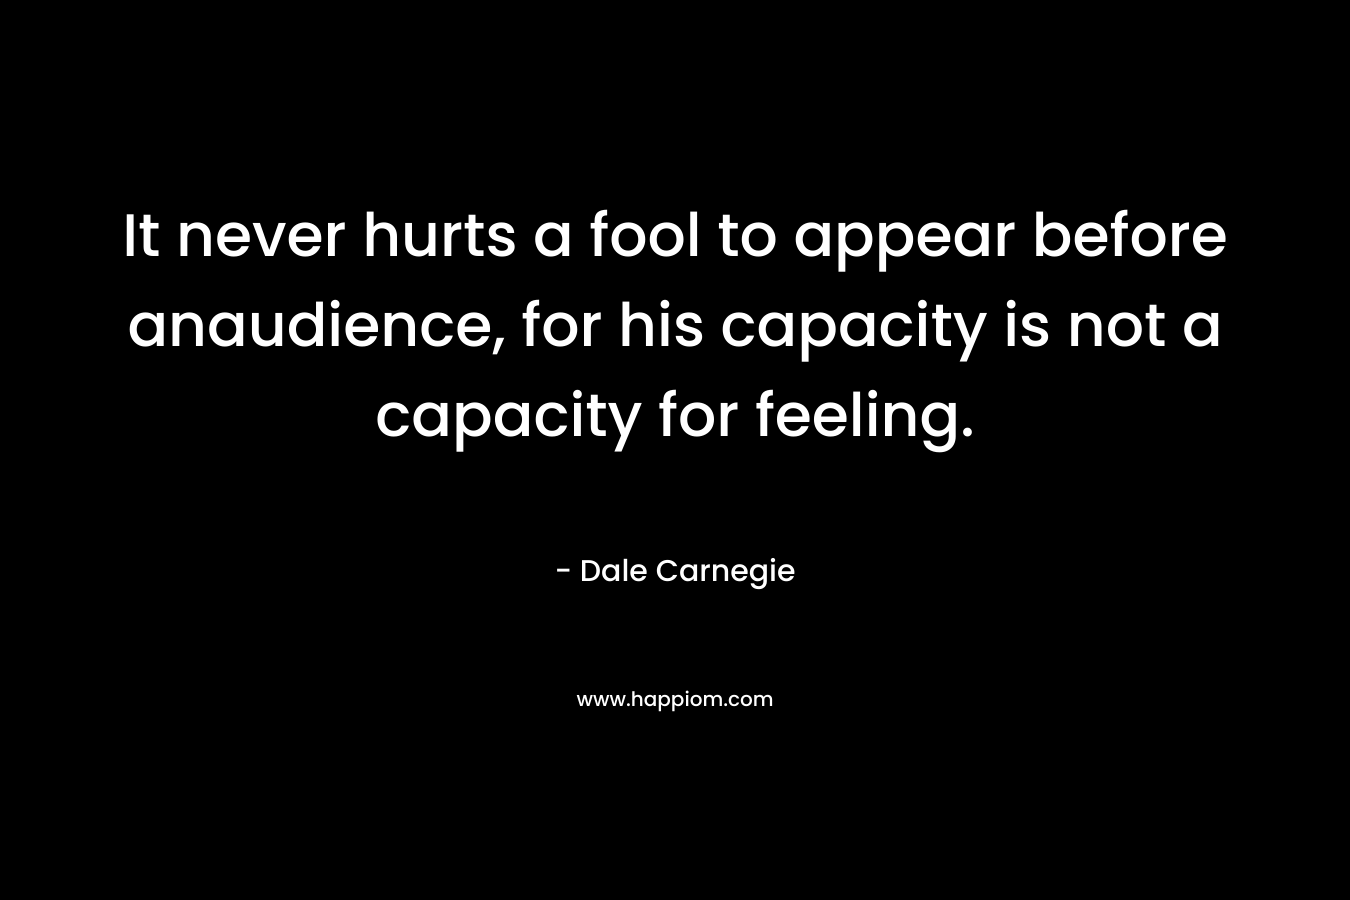 It never hurts a fool to appear before anaudience, for his capacity is not a capacity for feeling. – Dale Carnegie